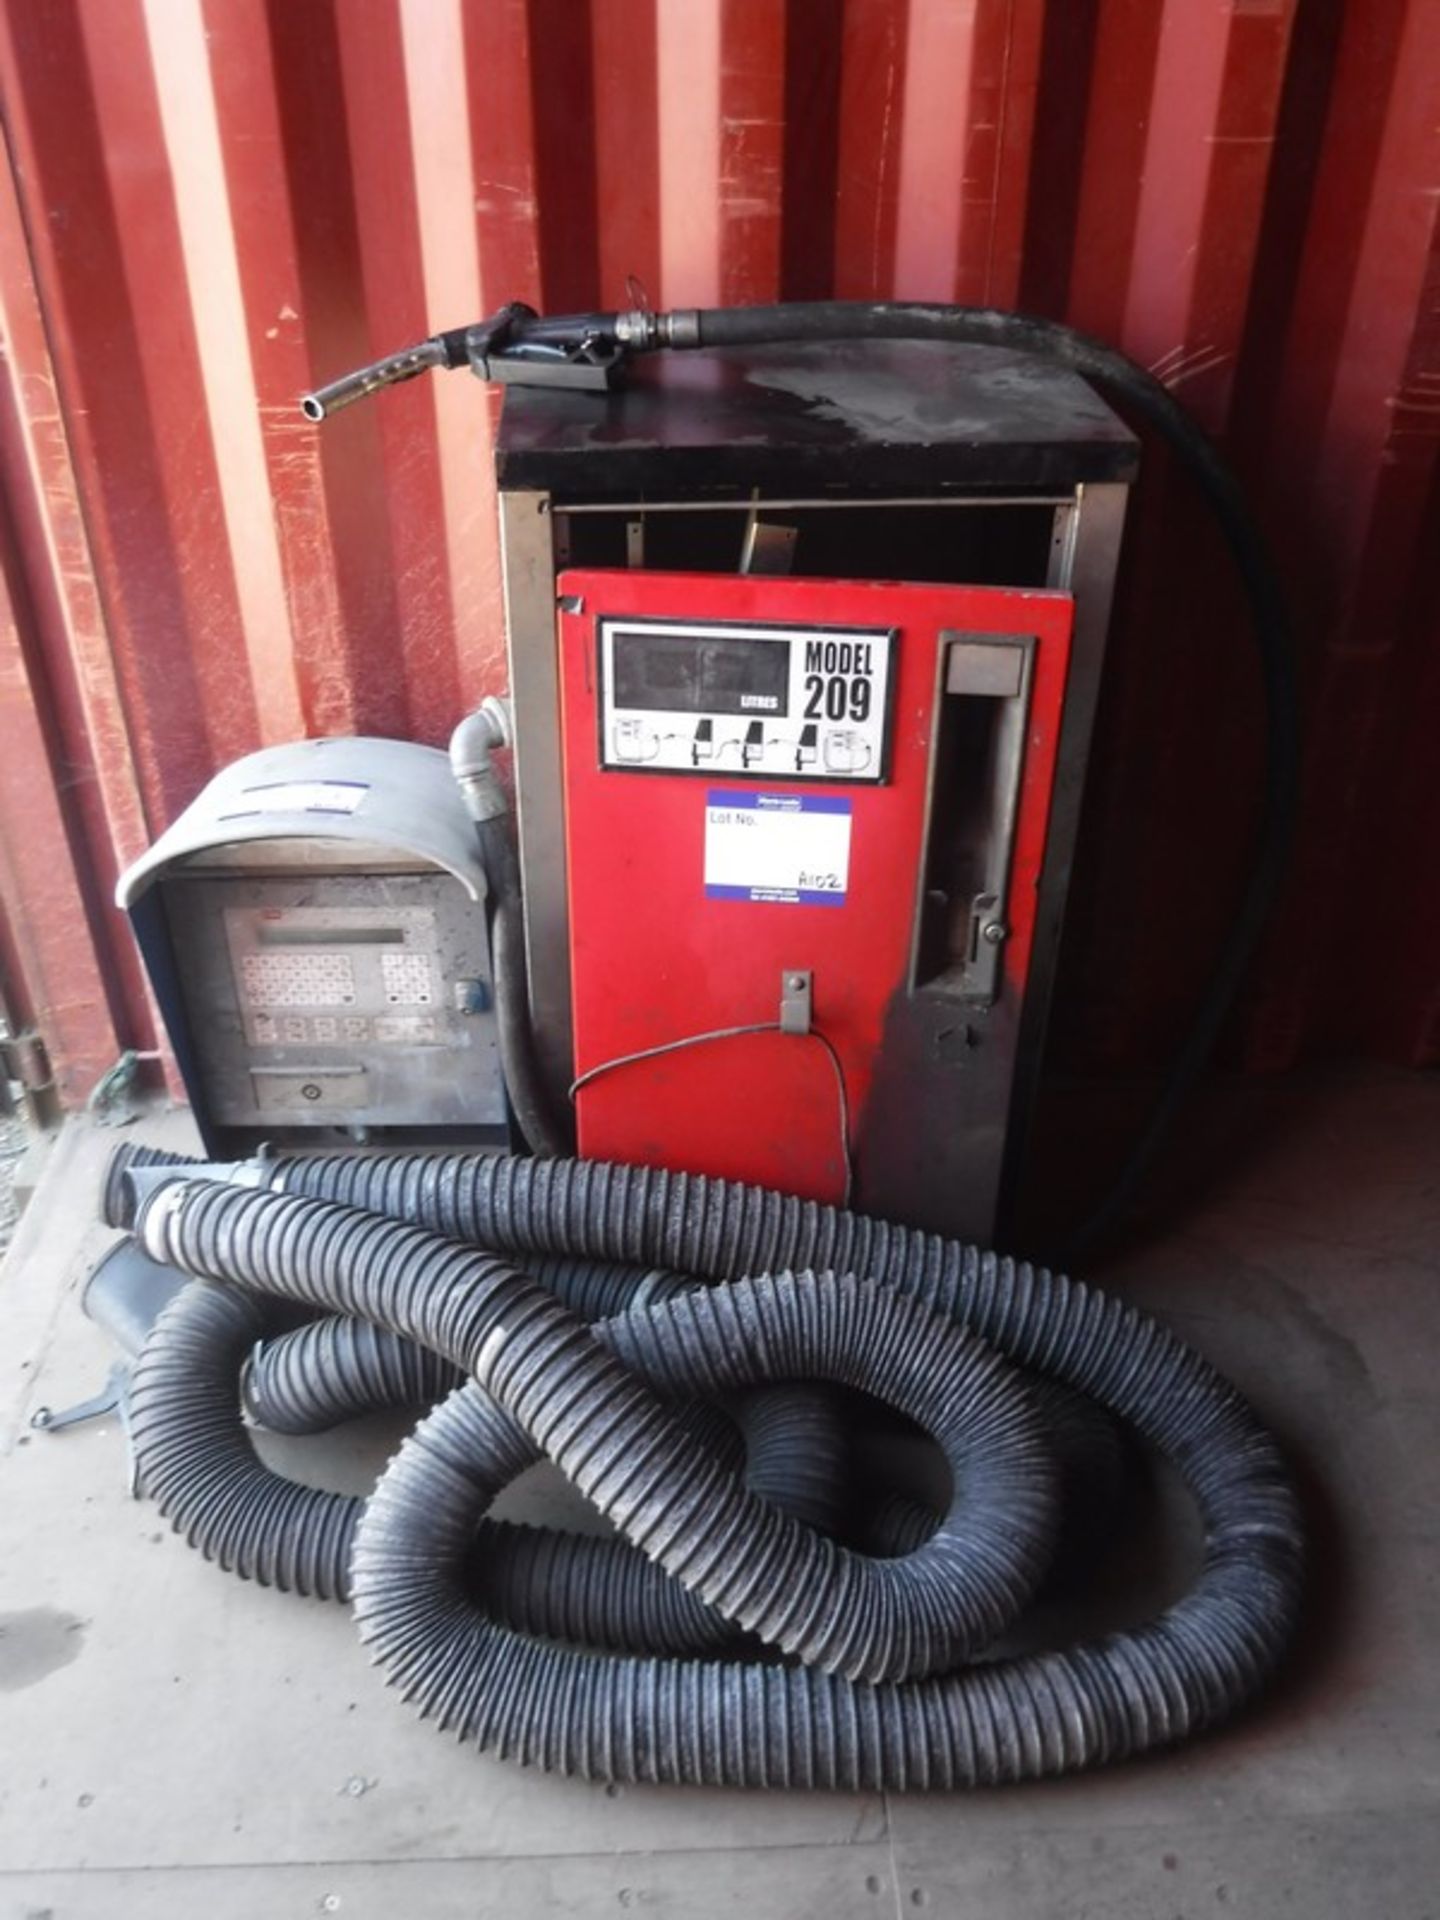 Fuel pump/dispenser spares or repairs with exhaust extractor hoses.